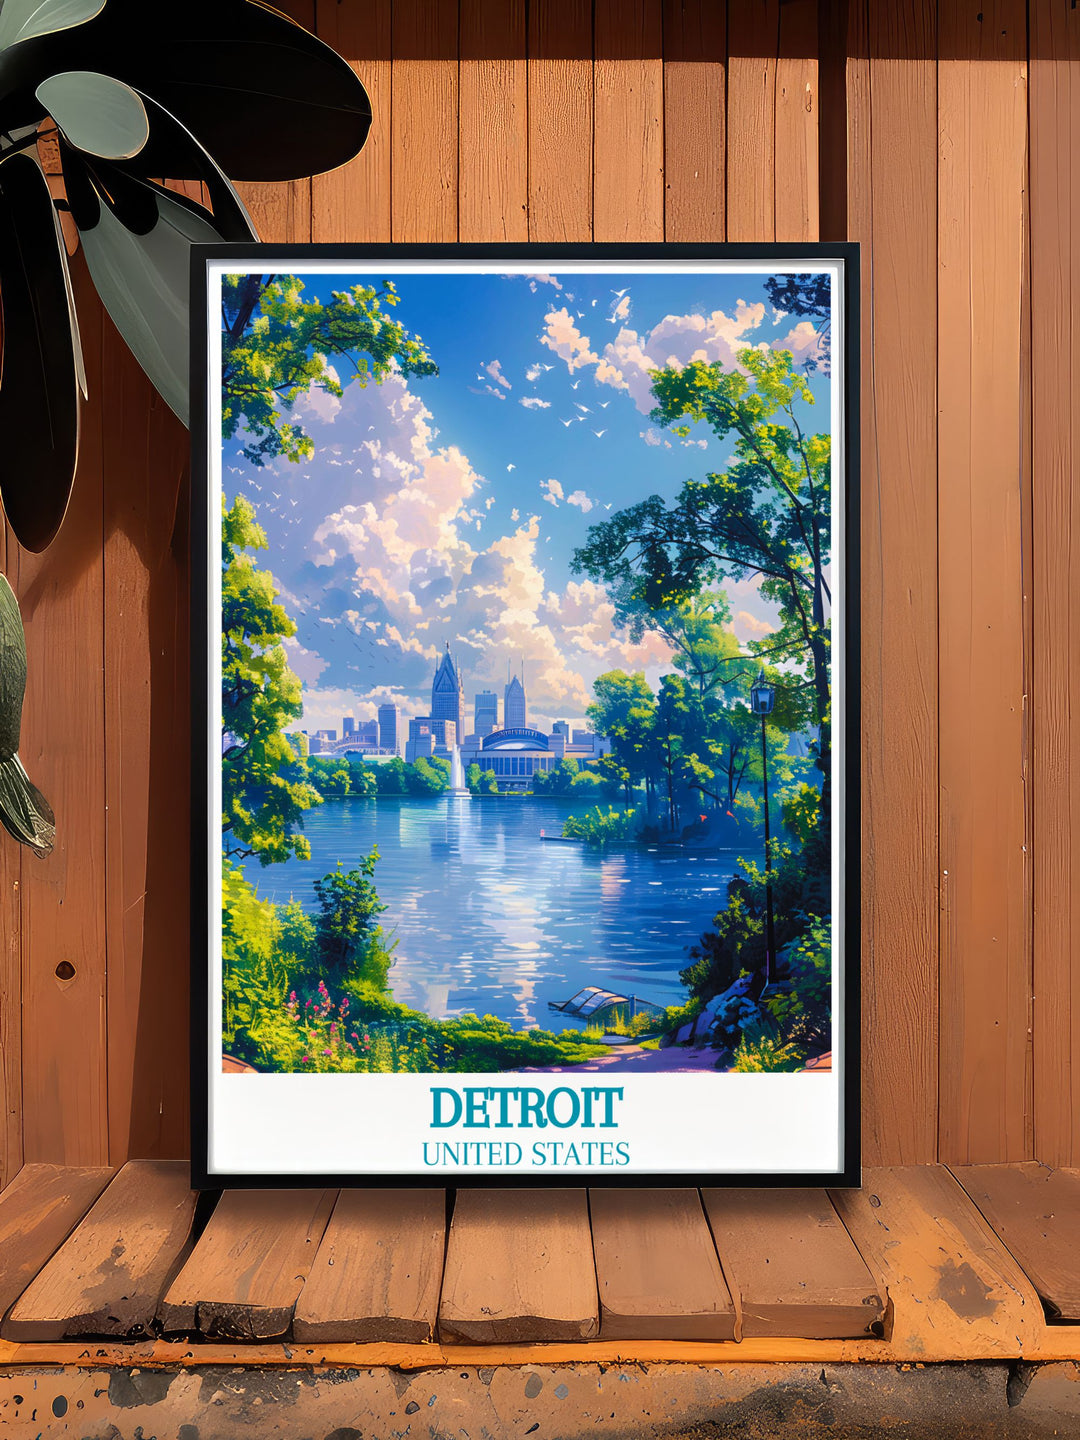 Modern wall decor showcasing the picturesque landscapes of Belle Isle Park, perfect for bringing a sense of tranquility and nature into your home.